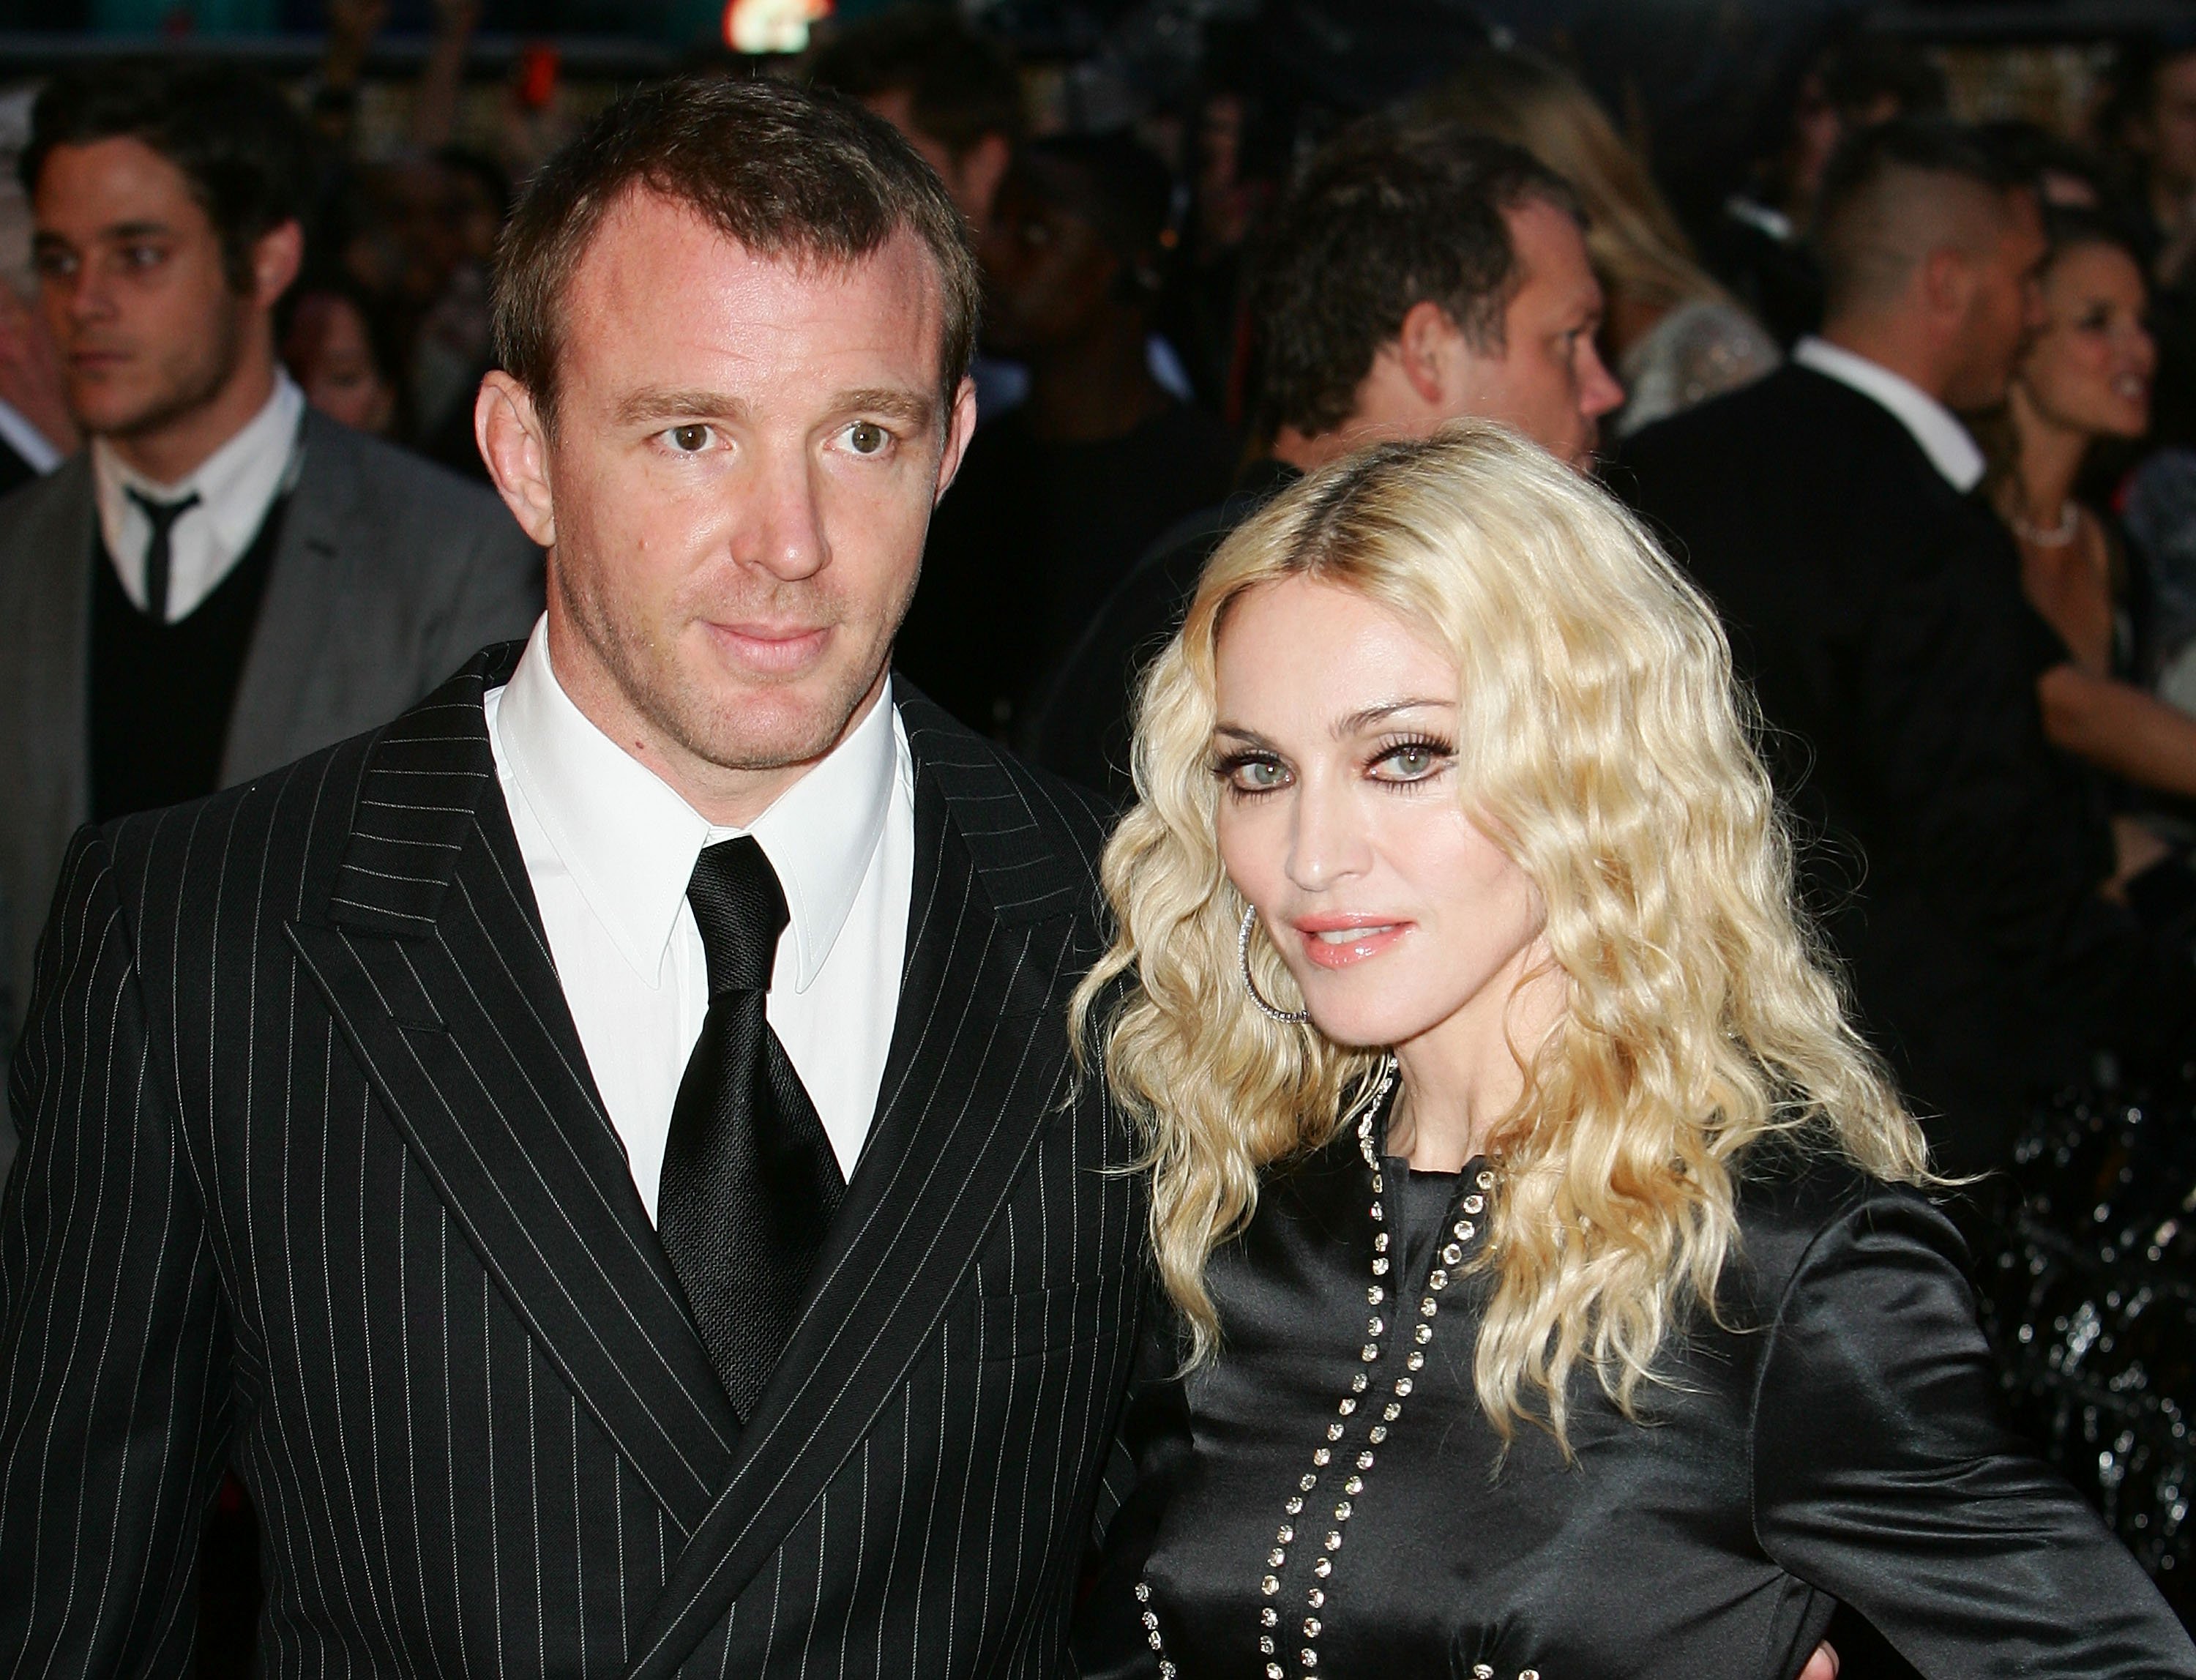 Madonna and Guy Ritchie in front of people